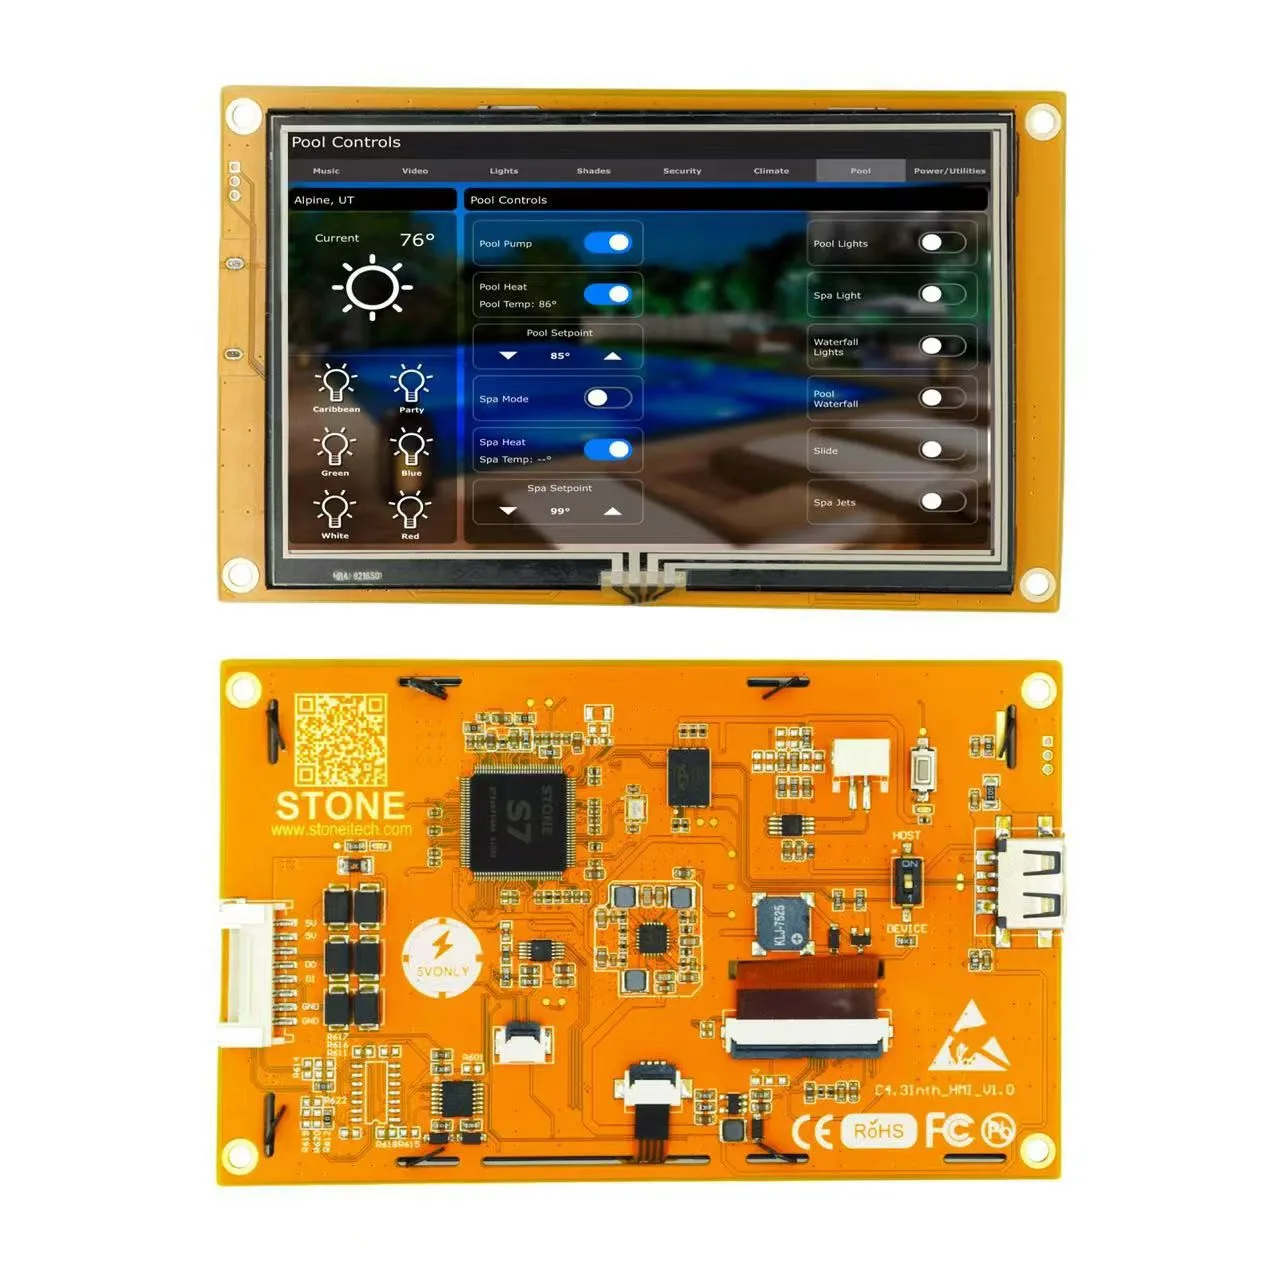 Stone 4.3Inch TFT LCD Module 128MB of flash memory for HMI projects, 1G Hz Cortex A8 CPU, and 262k true-to-life colors View